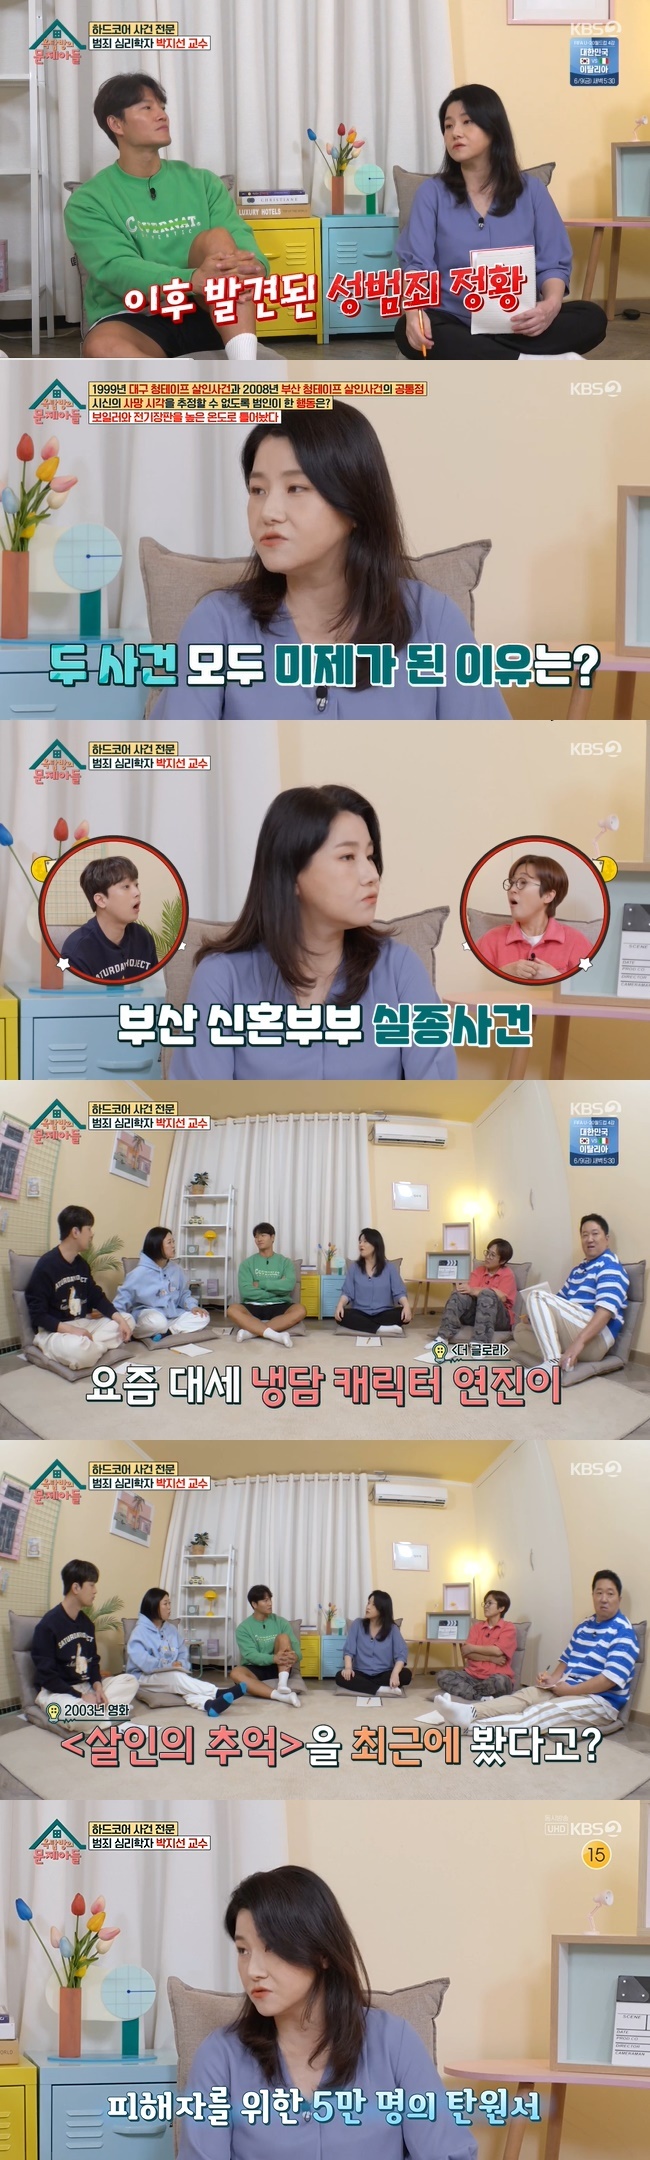 Crime psychologist Park Ji-sun, who became pregnant after seven years of marriage, has revealed why she decided to marry Husband.On June 7, KBS 2TV  ⁇ Problem Child in House ⁇  appeared Crime psychologist Park Ji-sun Professor.Park Ji-sun Professor, who showed a charismatic appearance in  ⁇   ⁇   ⁇   ⁇   ⁇   ⁇ , is now eight months pregnant.When asked if it was uncomfortable to walk, Park Ji-sun said, It seems to be better now than in the early pregnancy.MCs were worried about Park Ji-suns preaching as much as they usually encountered many Crime Events.I do not think  ⁇ Event is a terrible thing, but I do not think it is scary because I am worried about how to analyze them more quickly and catch them faster and make the world healthier.Park Ji-sun reveals mom is a big fan of Lee Chan-wonPark Ji-sun was born and said that the first time her mother forgot Jasins birthday was Lee Chan-wons Concert Day.  ⁇  My mothers YouTube list was full of my videos, but now Im pushed to see Lee Chan-won I was grateful to Lee Chan-won for his fan service.Park Ji-sun, who specializes in hardcore, was surprisingly a lover of love programs. Park Ji-sun was an important point in appearing in  ⁇ Problem Child in House ⁇ .I wait only for Wednesday. The relationship between people, characters, and the relationship between people who change every week is so fun, he said.Jung Hyung-don asked about Park Ji-suns Husband, saying, My wife is a psychologist and I can not lie.Park Ji-sun said, Our Husband does not lie. Husband secretly boiled ramen noodles and revealed the story that Jasin had caught.Lee Chan-won, who met Park Ji-suns Husband on the day of recording, said that they seemed to be very angry with each other and asked about their nickname.Park Ji-sun said, I call Husband a bear, and Husband calls me a pretty one. The messenger replied shyly, It is called  ⁇   ⁇   ⁇   ⁇   ⁇   ⁇ .Park Ji-sun, who has been married for more than seven years, also revealed a moment when he fell in love with Husband. Park Ji-sun has a moment when I thought I could go on forever if I looked like that.I went to the bathroom and came out and remembered that I was standing with corn.Park Ji-sun recently referred to the Busan Roundabout Event as an event that felt real-life horror in Tenggal.Park Ji-sun dragged Victims to the CCTV blind spot when Victims lost consciousness after a round-the-clock kick. Seven minutes later, he left his seat and there is a sex crime situation.Do not ask me if I might have done something more. It is known as assault, but if you look at the behavior, it was not just an angry assault, but the purpose was to make Victims completely unconscious. Attack was a tool and a means.Park Ji-sun commented on several unmade events, including the 1999 Deagu Cheong Tape Murder Event, the 2008 Busan Cheong Tape Murder Event, and the Deagu Frog Boy Event, as well as explaining Bereavements criteria for judgment.Park Ji-sun named Kang Ho-soon as the Crime character closest to the Bereavement of Koreas Crime, and said, I have never thought about Victims during the interview, but Im sorry to think about it.It is all in it. There is no guilt, no empathy, and emotional coldness.In addition, Park Ji-sun said that according to the Bereavement diagnostic criteria, the bereavement score will not come out of the park yeon-jin of the Gloria  ⁇ , and the park yeon-jin is not Bereavement.Park Ji-sun pointed out that people have too much fear.Park Ji-sun recently watched the 2003 movie  ⁇ Murders Memories ⁇ . Park Ji-sun hasnt seen it for nearly 20 years, and we dont know how the scenes depicting certain characters as criminals will affect it.I thought I would not watch the movie until I saw the actual event data. This was the first time I had seen Murders memories from beginning to end, he said.Park Ji-sun pointed out Susa, who was innocent of the Nakdong River MurderEvent, who was found innocent 31 years after the event, and Susa, who forced a false confession.I remember all the dates related to the event that I was impressed with. Jang Dong-ik smiled too brightly and said, He told me to live happily.Park Ji-sun said, Event is terrible for those who are afraid after the Busan Roundabout Event, but less than a week after the event was announced, 50,000 people wrote a petition for Victims.It is a scary world that can be hurt by strangers, but it is also a beautiful society where 50,000 people gathered for Victims, and it is up to each person to focus on where I look at the world. 